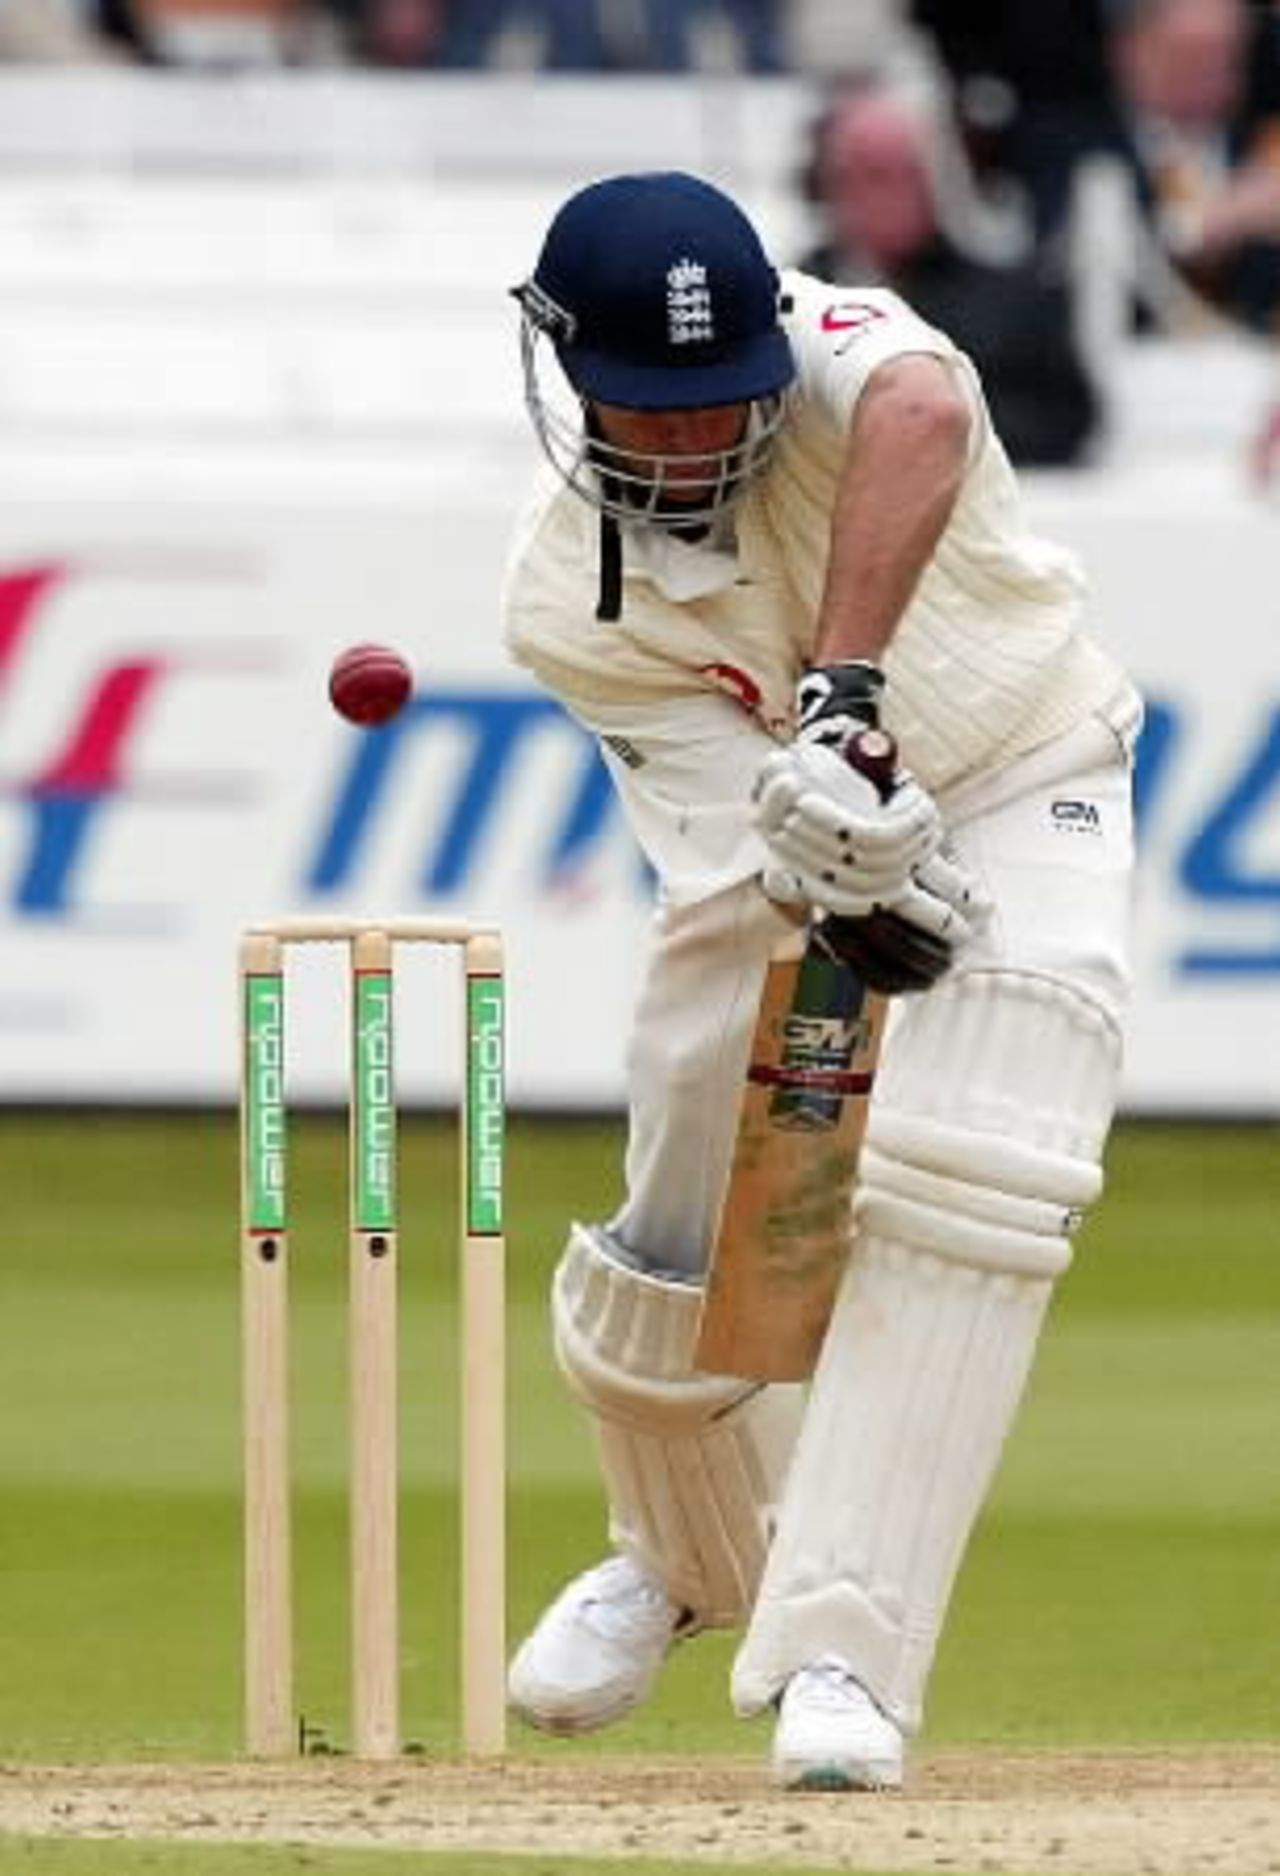 England Batsman Michael Vaughan plays a defensive stroke against a ball from Sri Lanka's left-arm fast bowler Ruchira Perera on the third day of the first test match at Lords, May 18, 2002